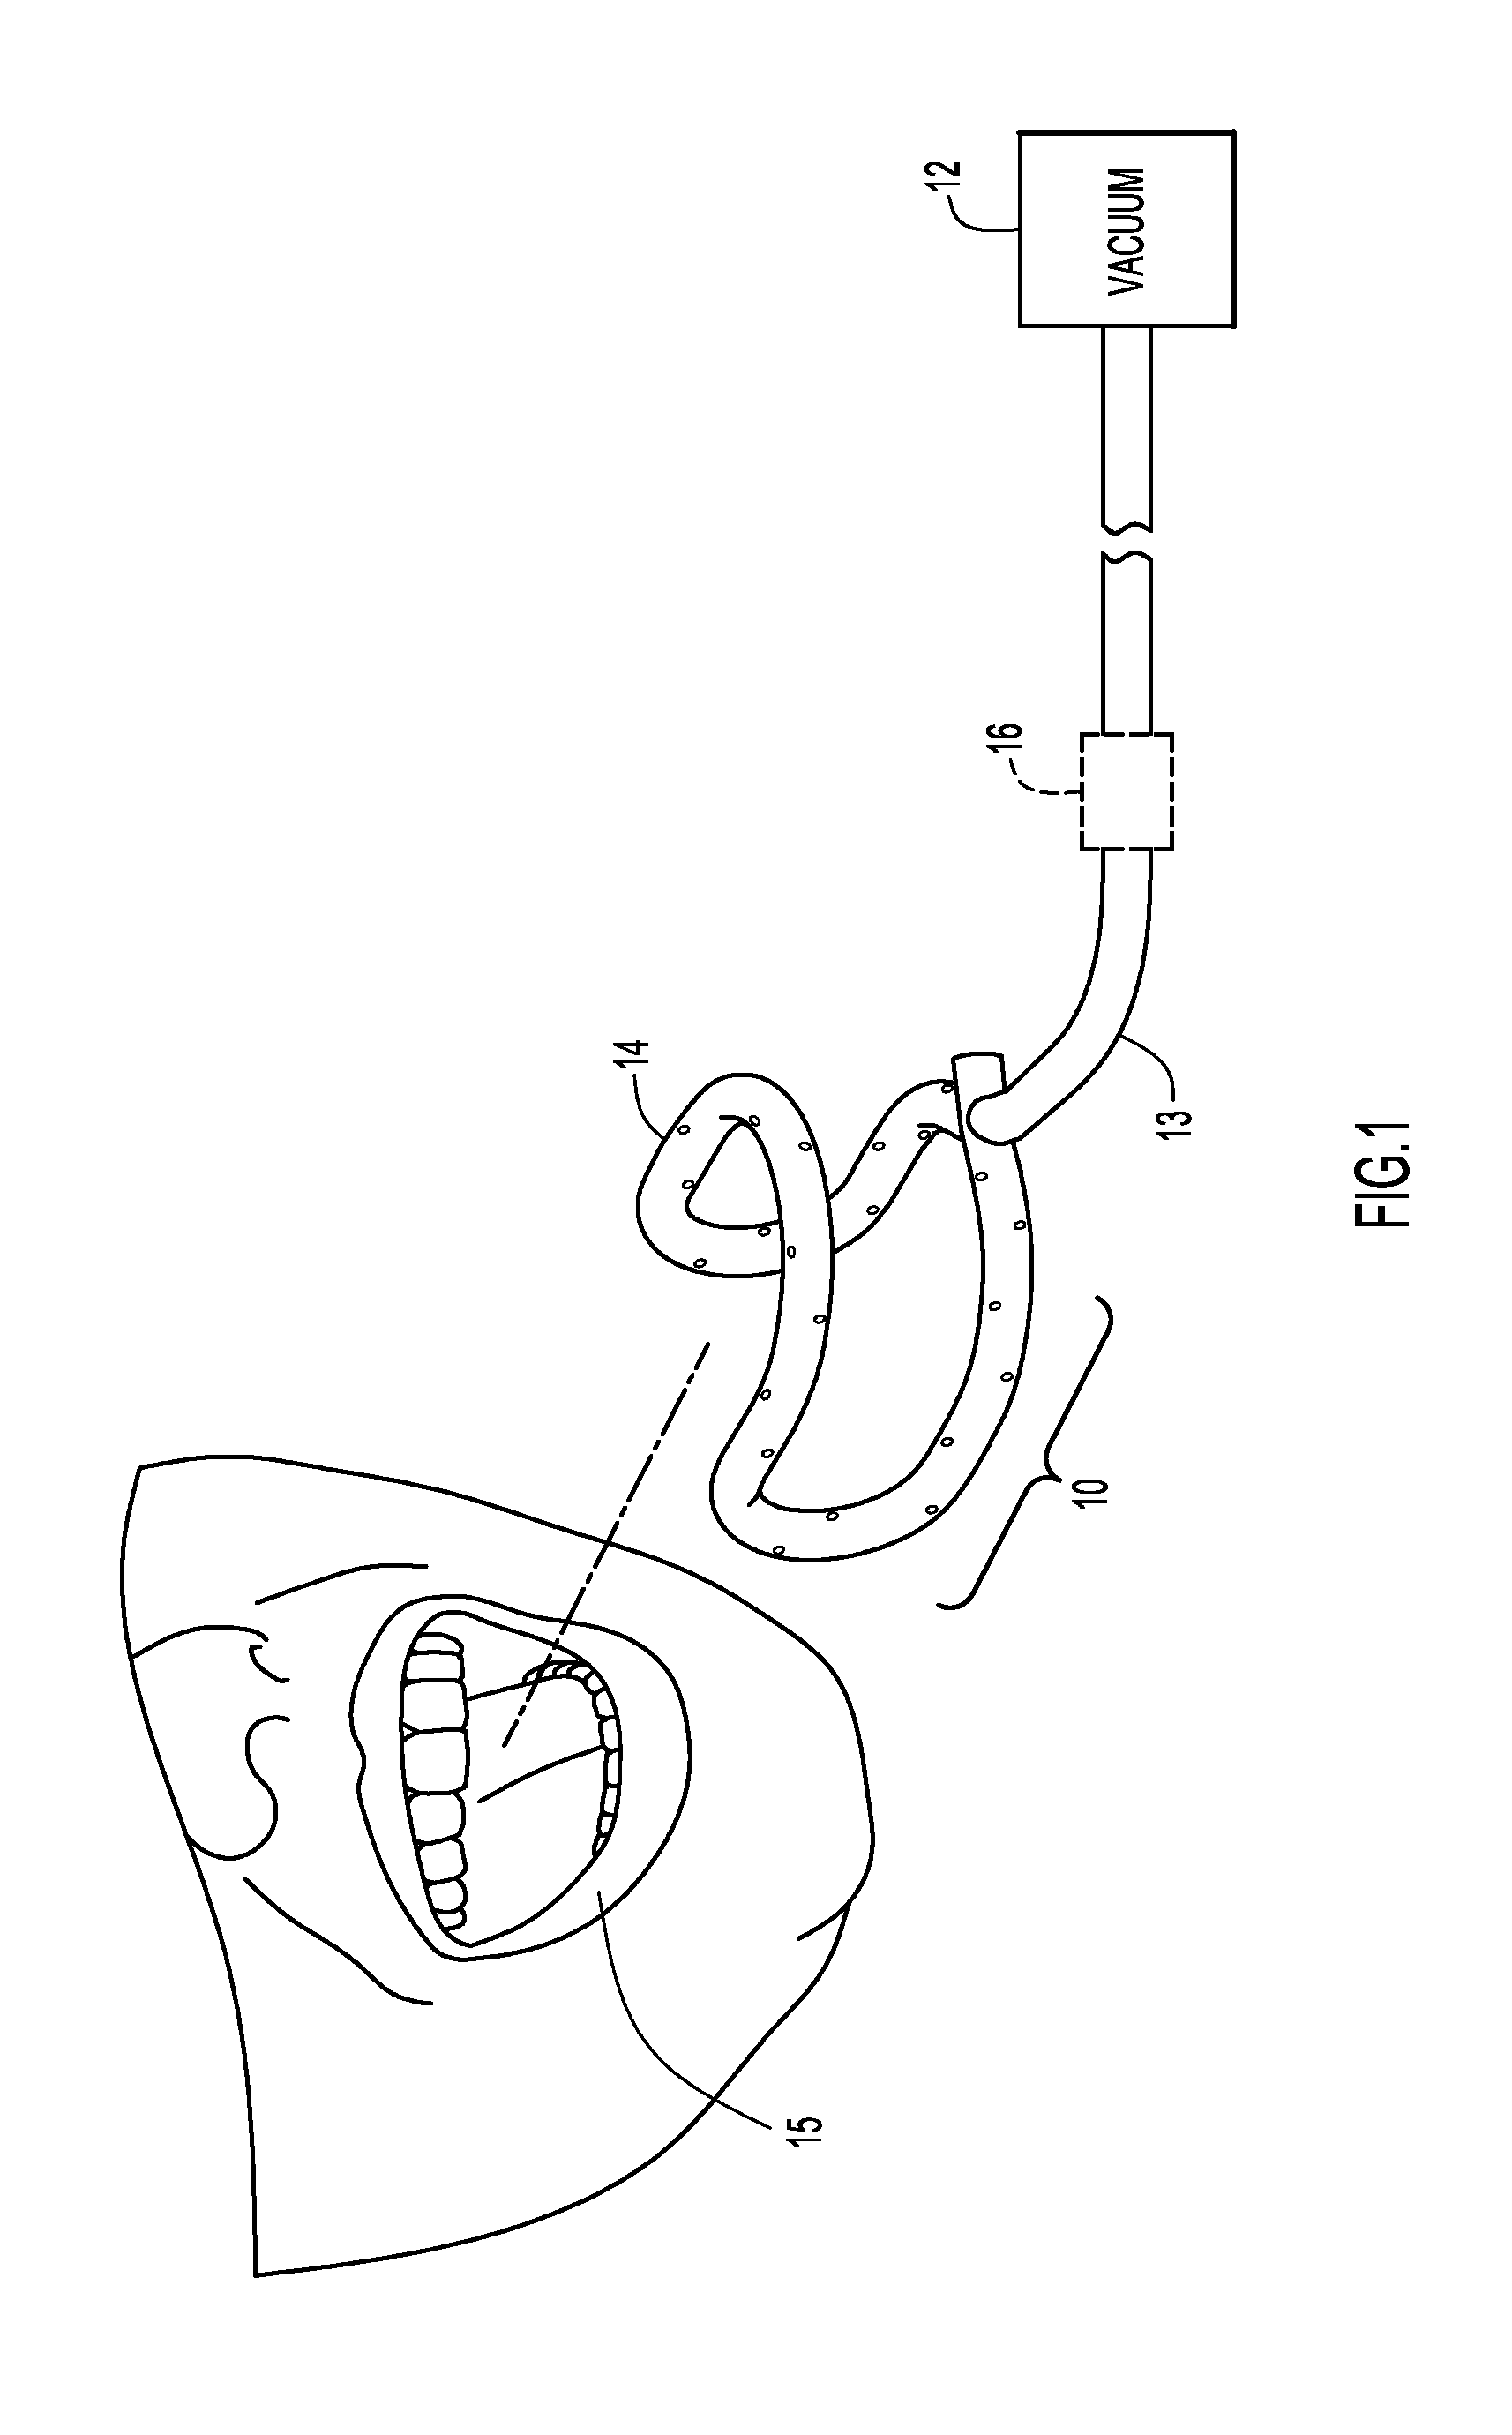 Dental Appliance and Method for Removing Bodily and Other Fluids From a Dental Site